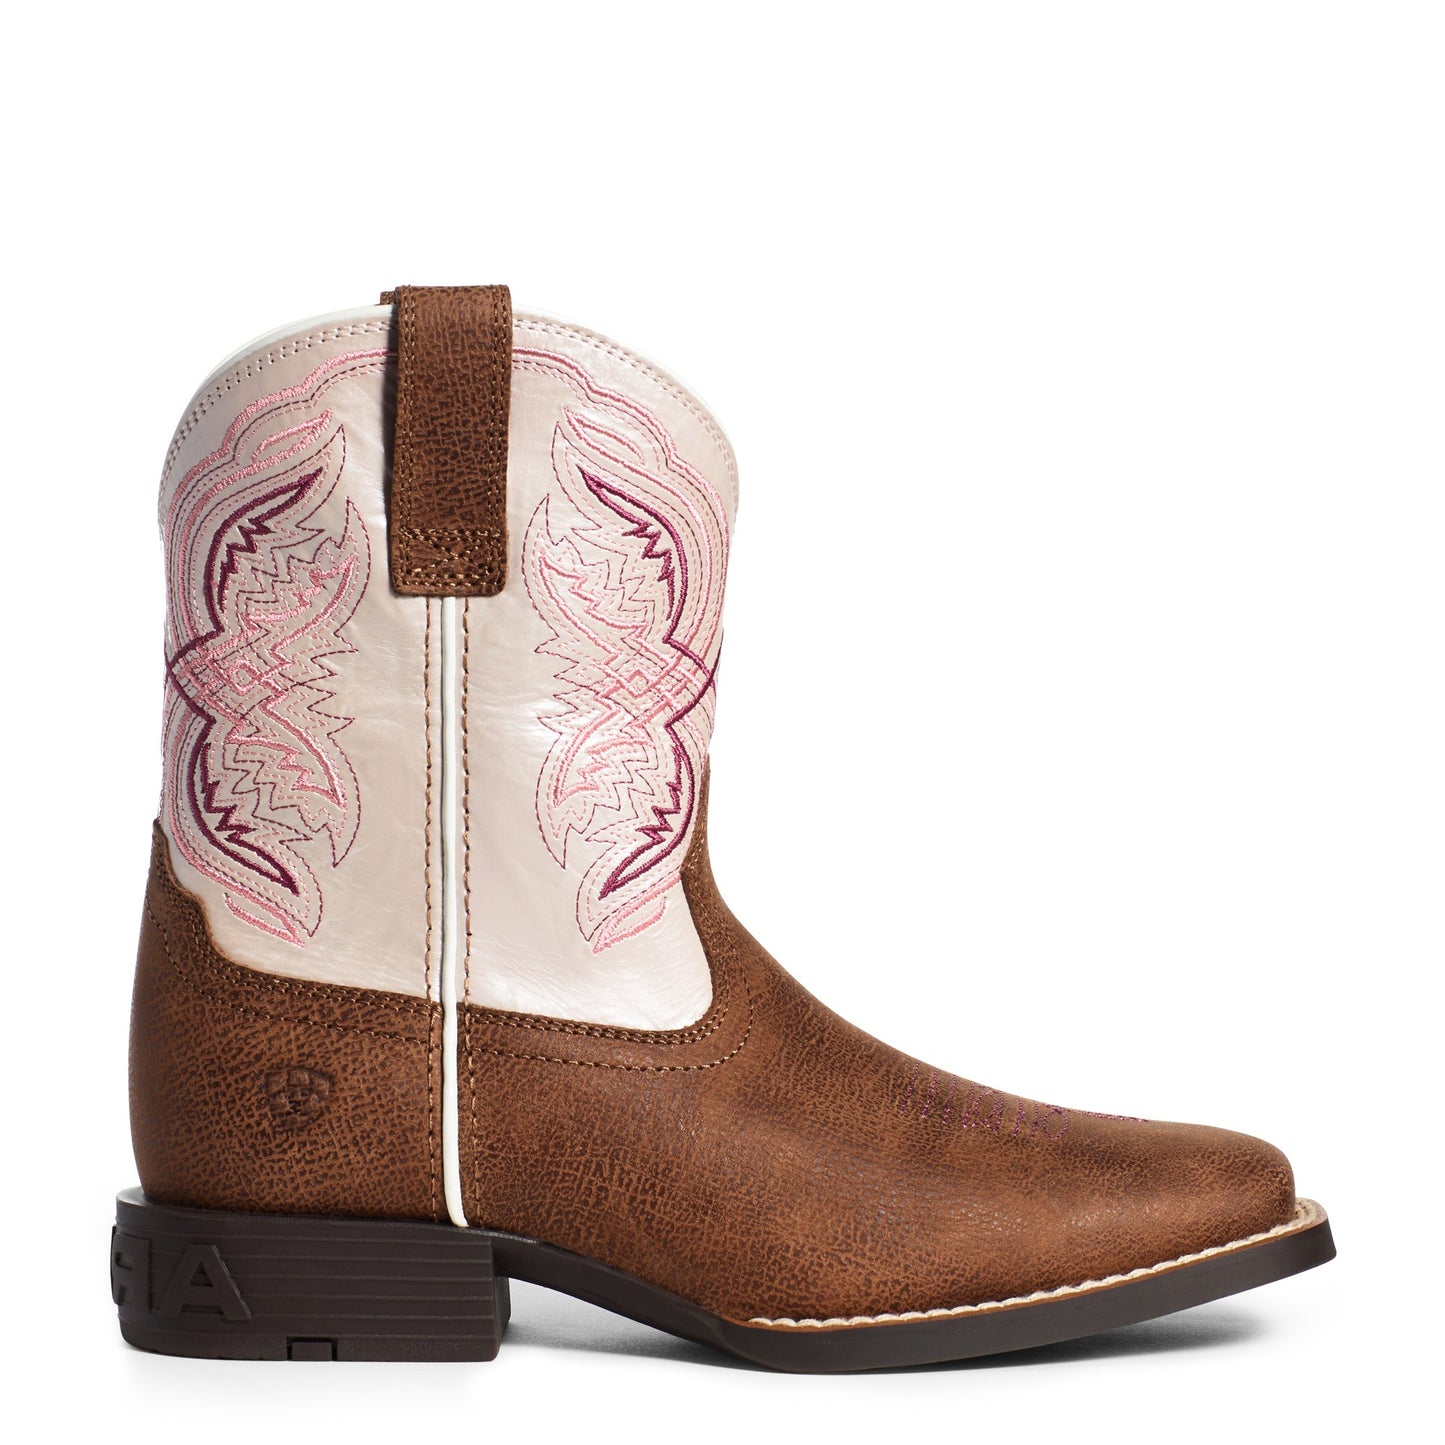 Ariat Youth Girl's Double Kicker Adobe Tan an Pink Boots 10036849